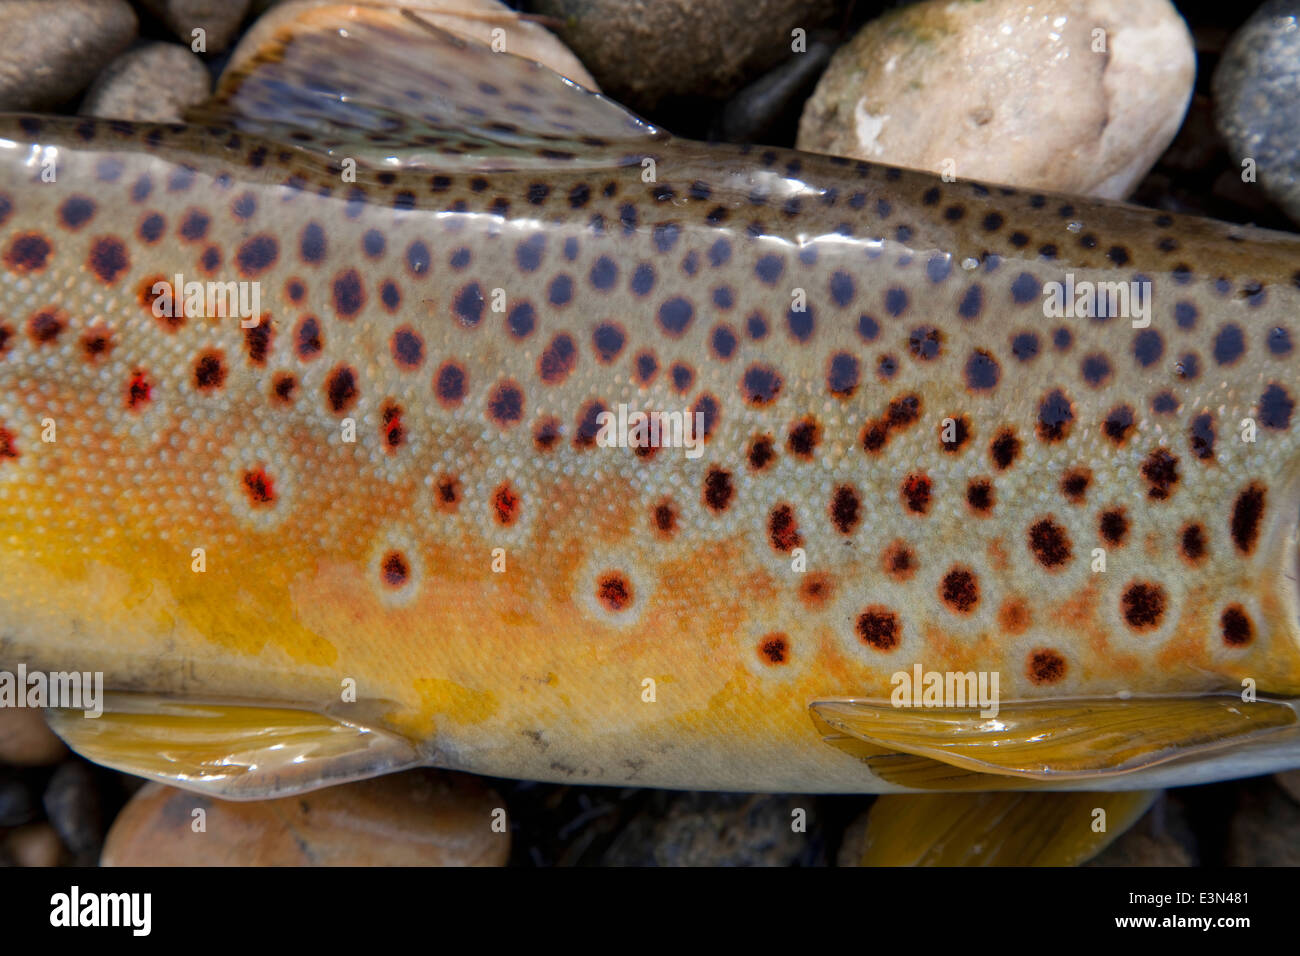 Close-up view of Brown Trout caught while fly fishing on the North Platte River in Wyoming, USA. Stock Photo